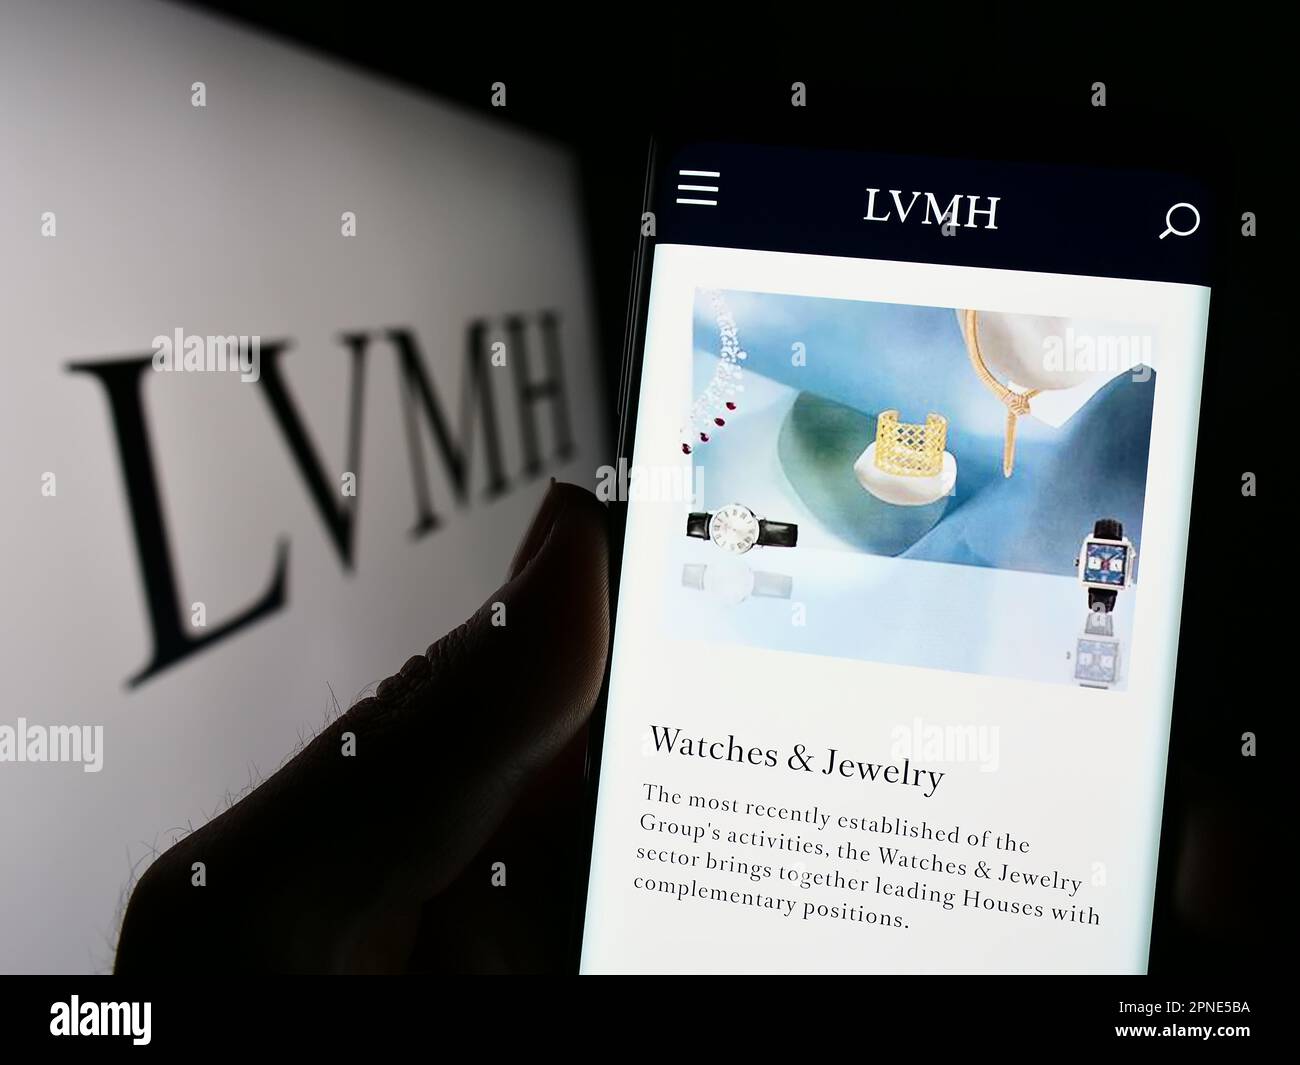 Person holding smartphone with web page of company LVMH Moet Hennessy Louis Vuitton SE on screen with logo. Focus on center of phone display. Stock Photo